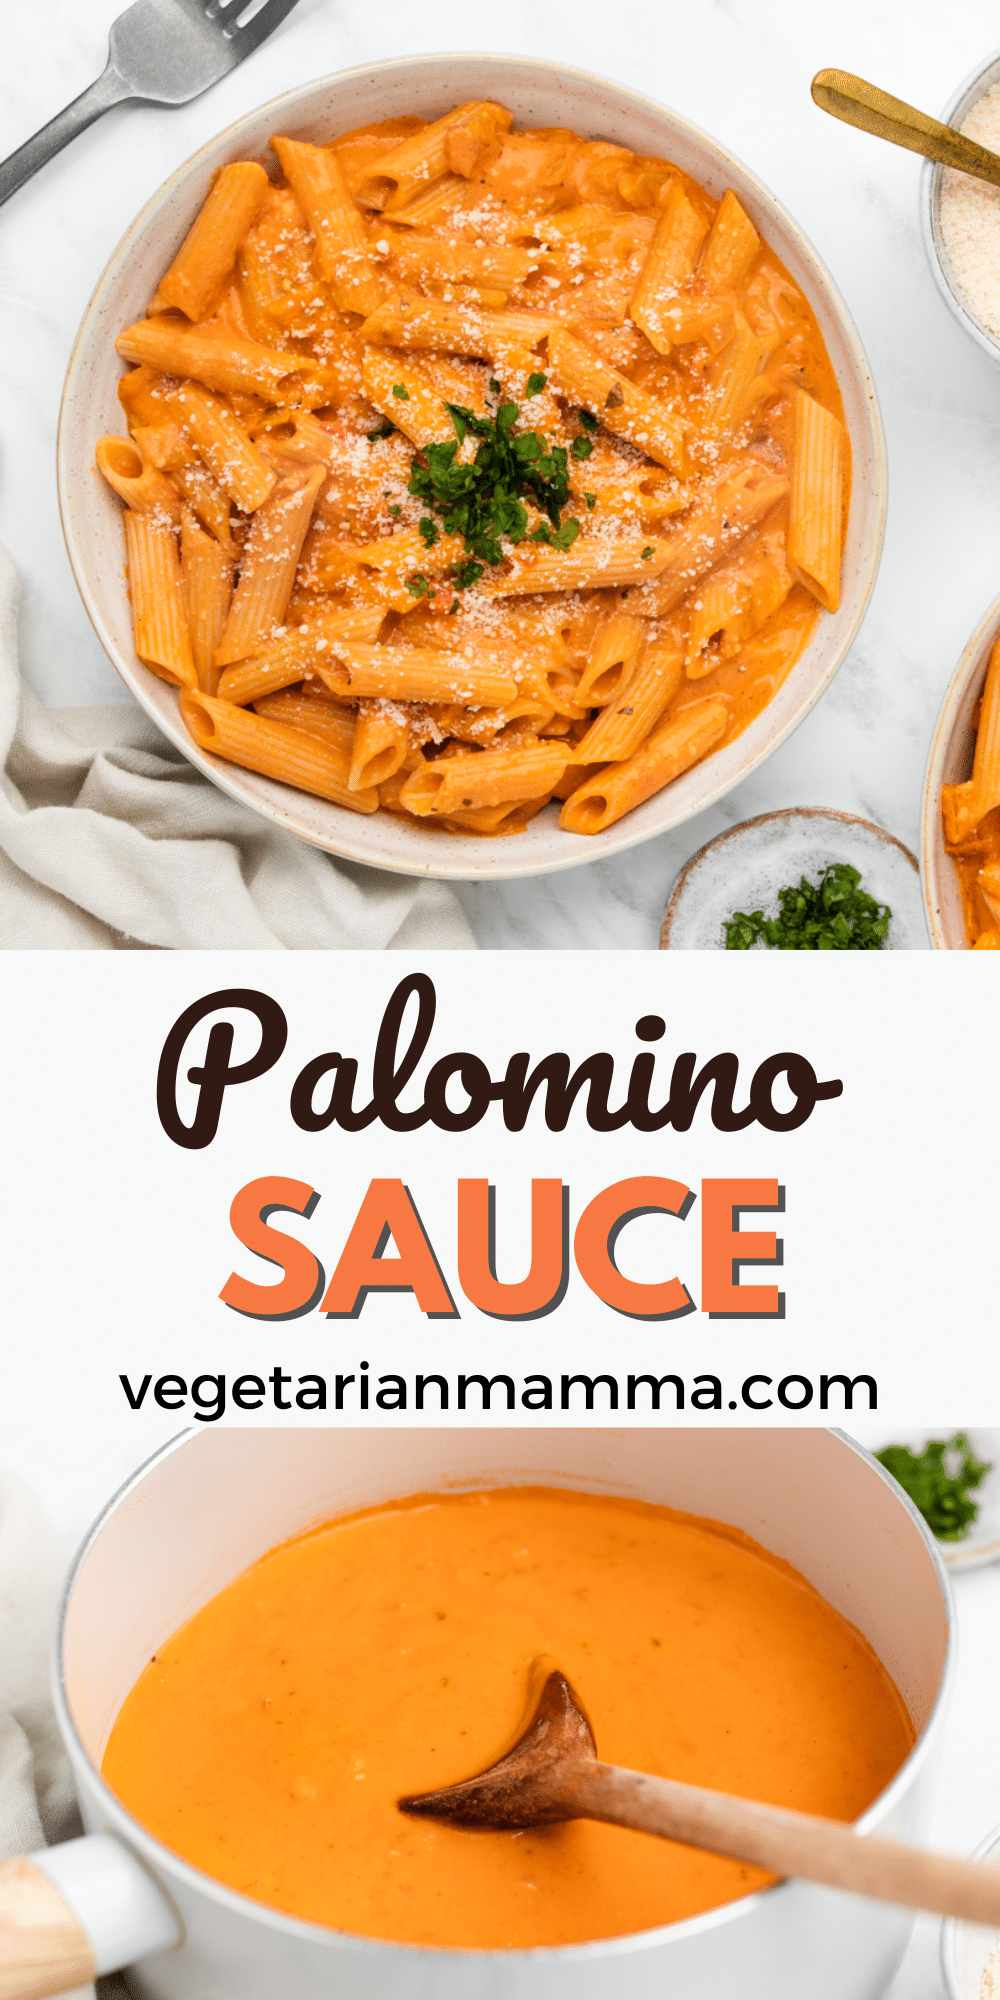 The most delicious creamy tomato sauce for your pasta is this rose-colored pasta sauce called Palomino Sauce!